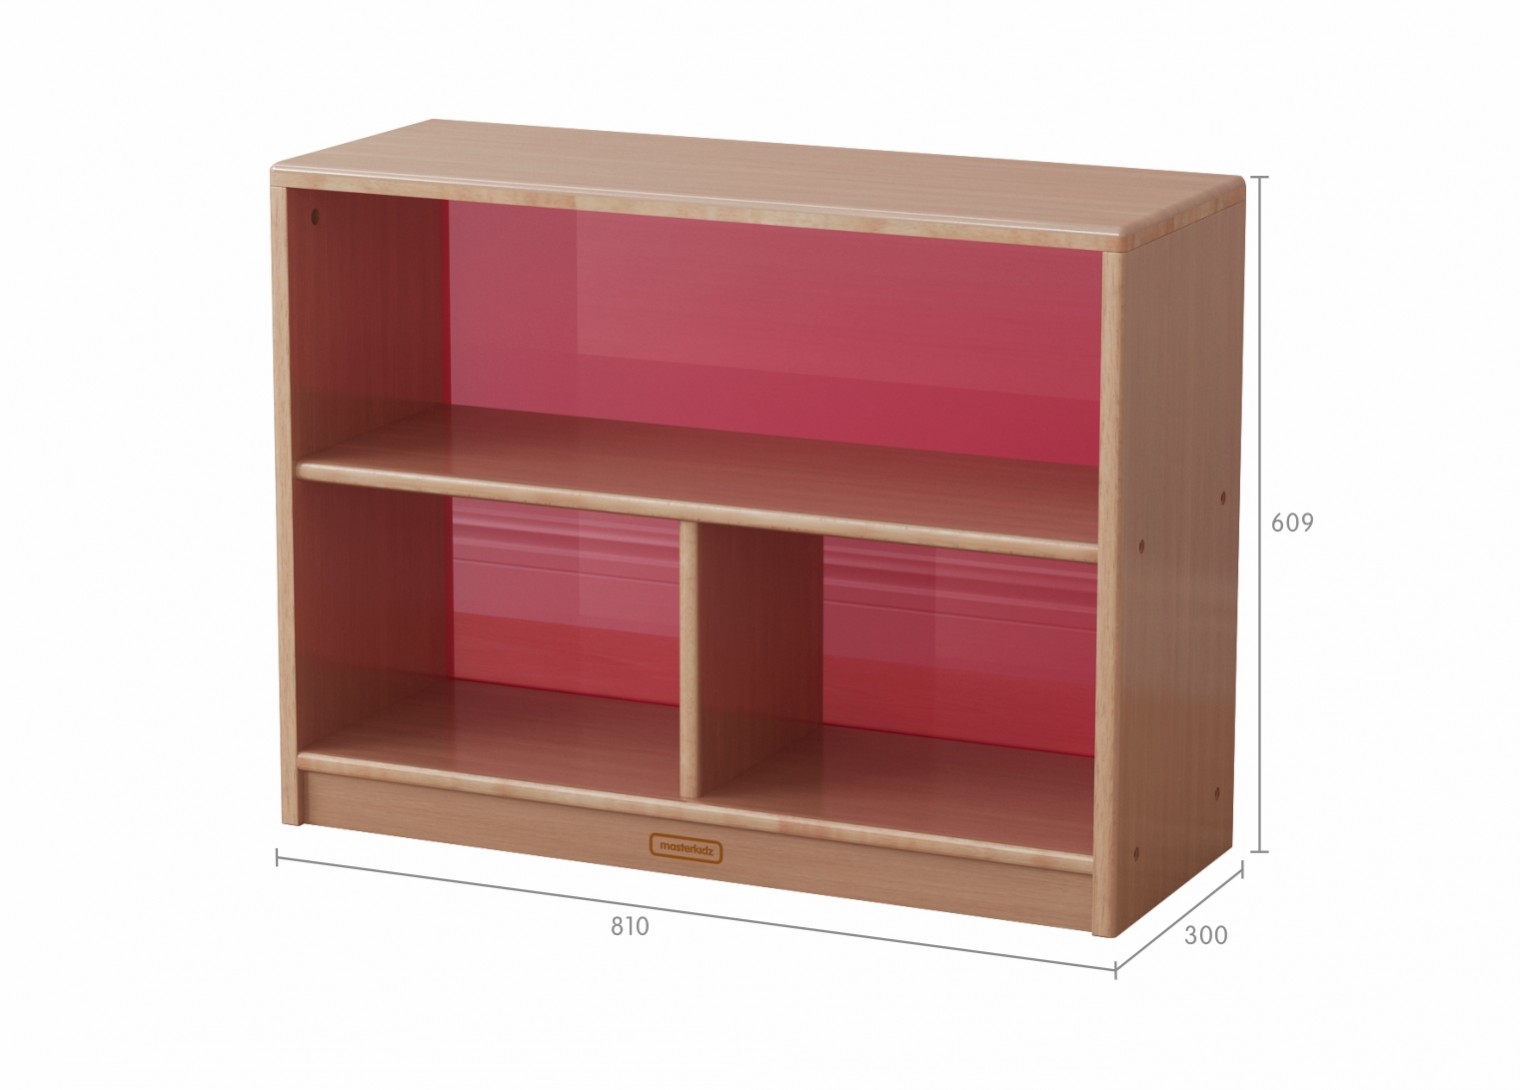 Forest School - 609H x 810L Wooden  3-Compartment Shelving Unit - Translucent Red Back